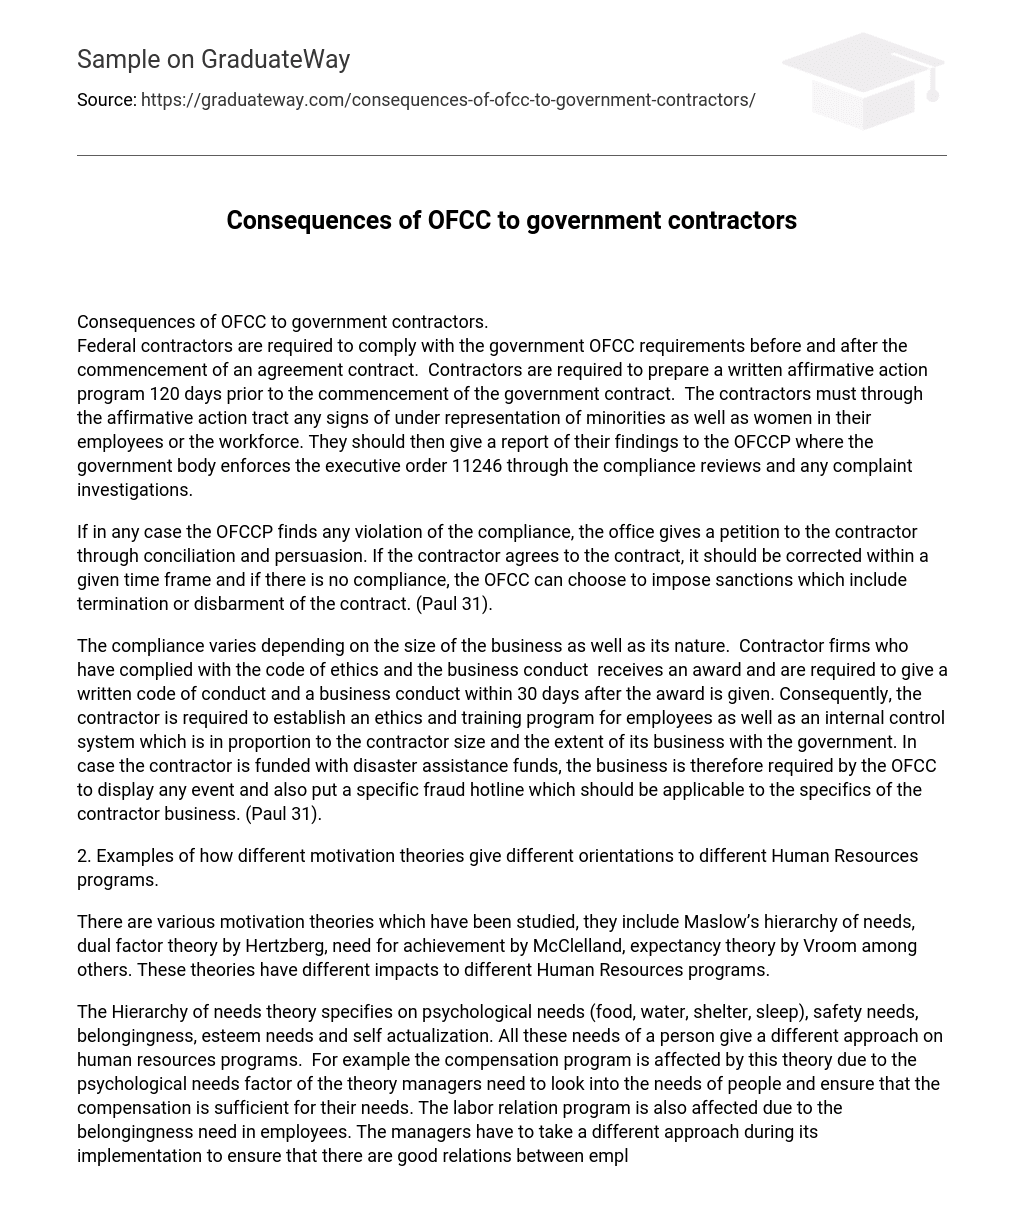 Consequences of OFCC to government contractors